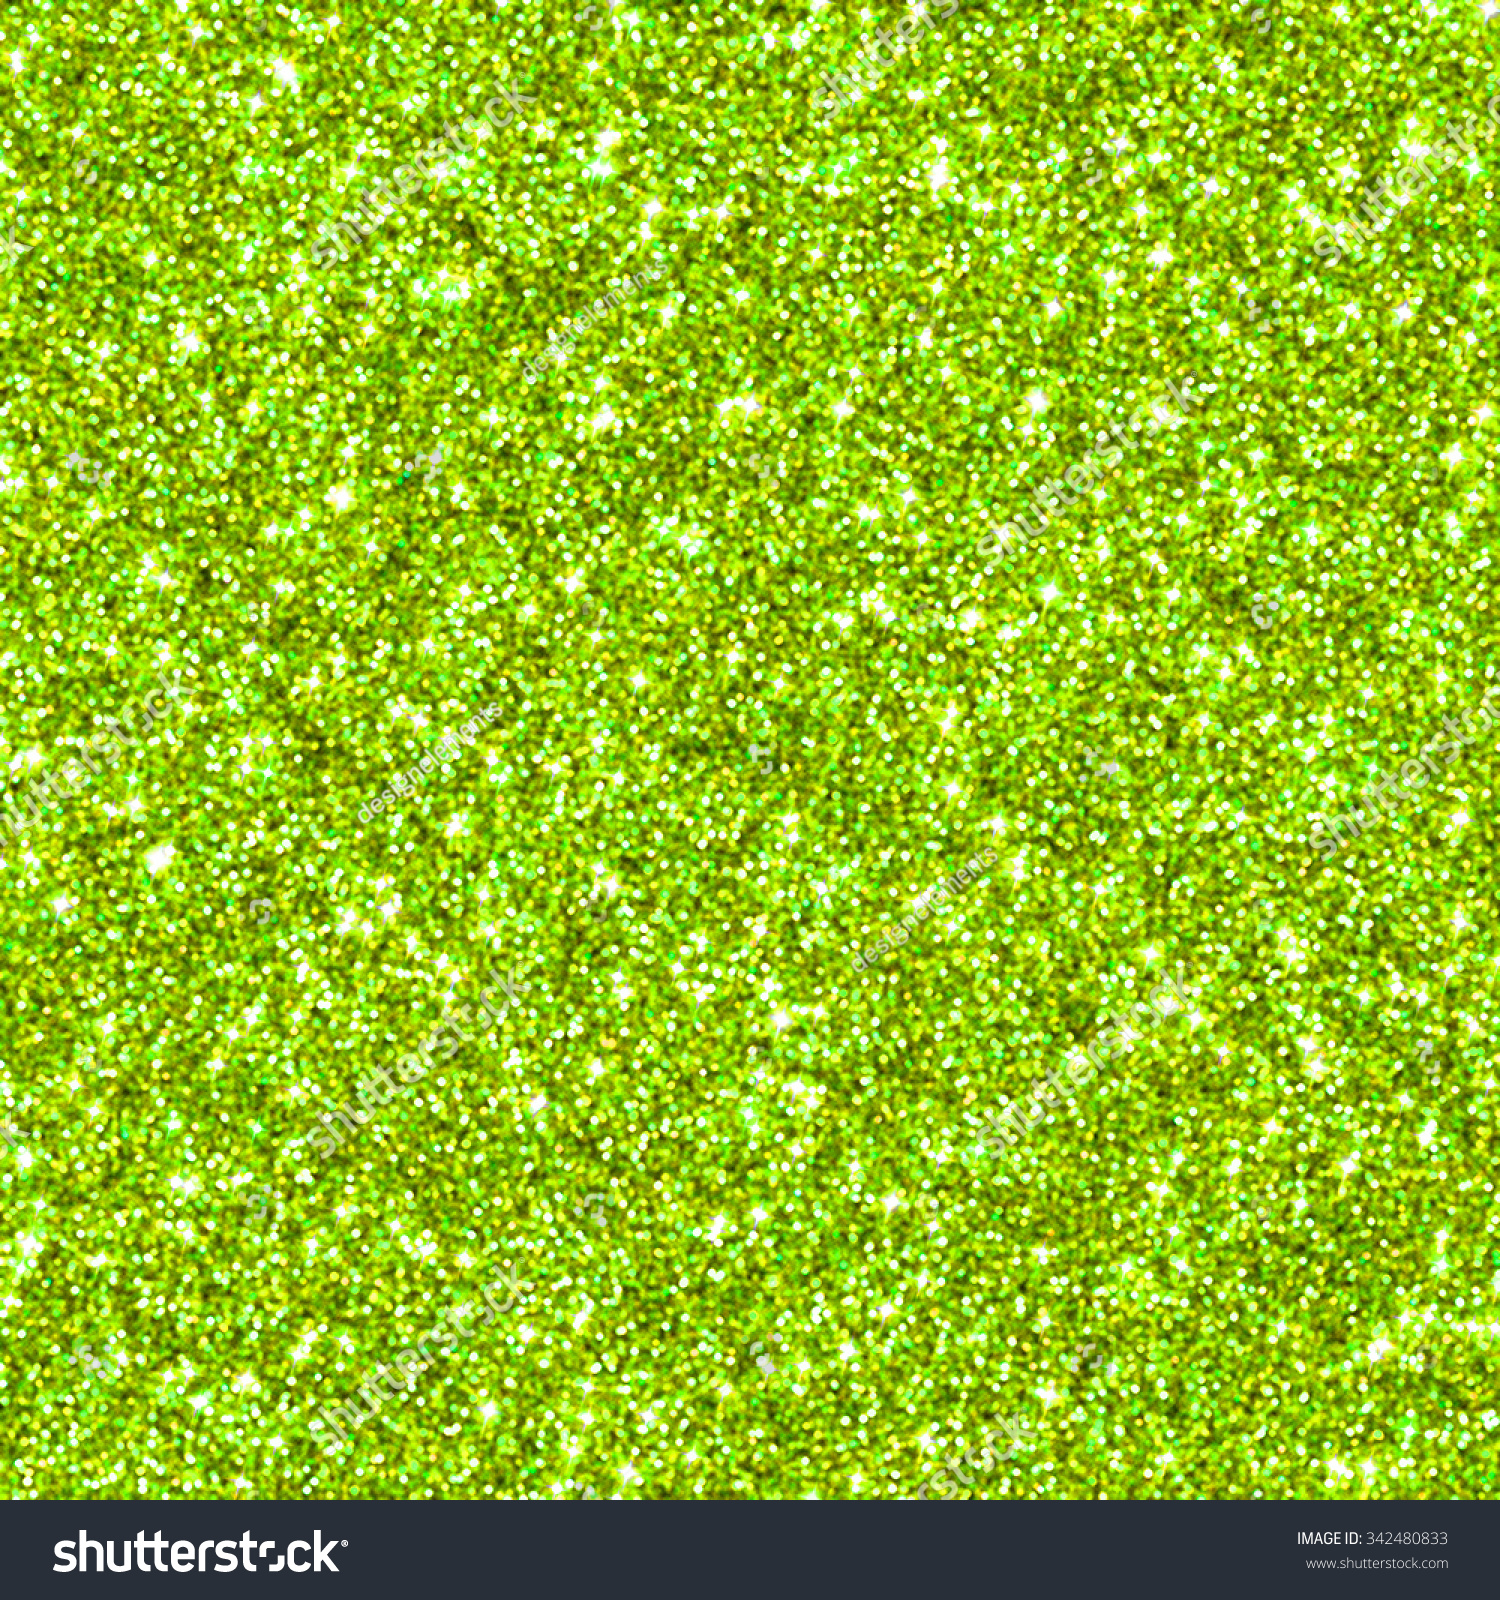 Lime Green Glitter Texture Background Blur Backgrounds Textures Stock Image